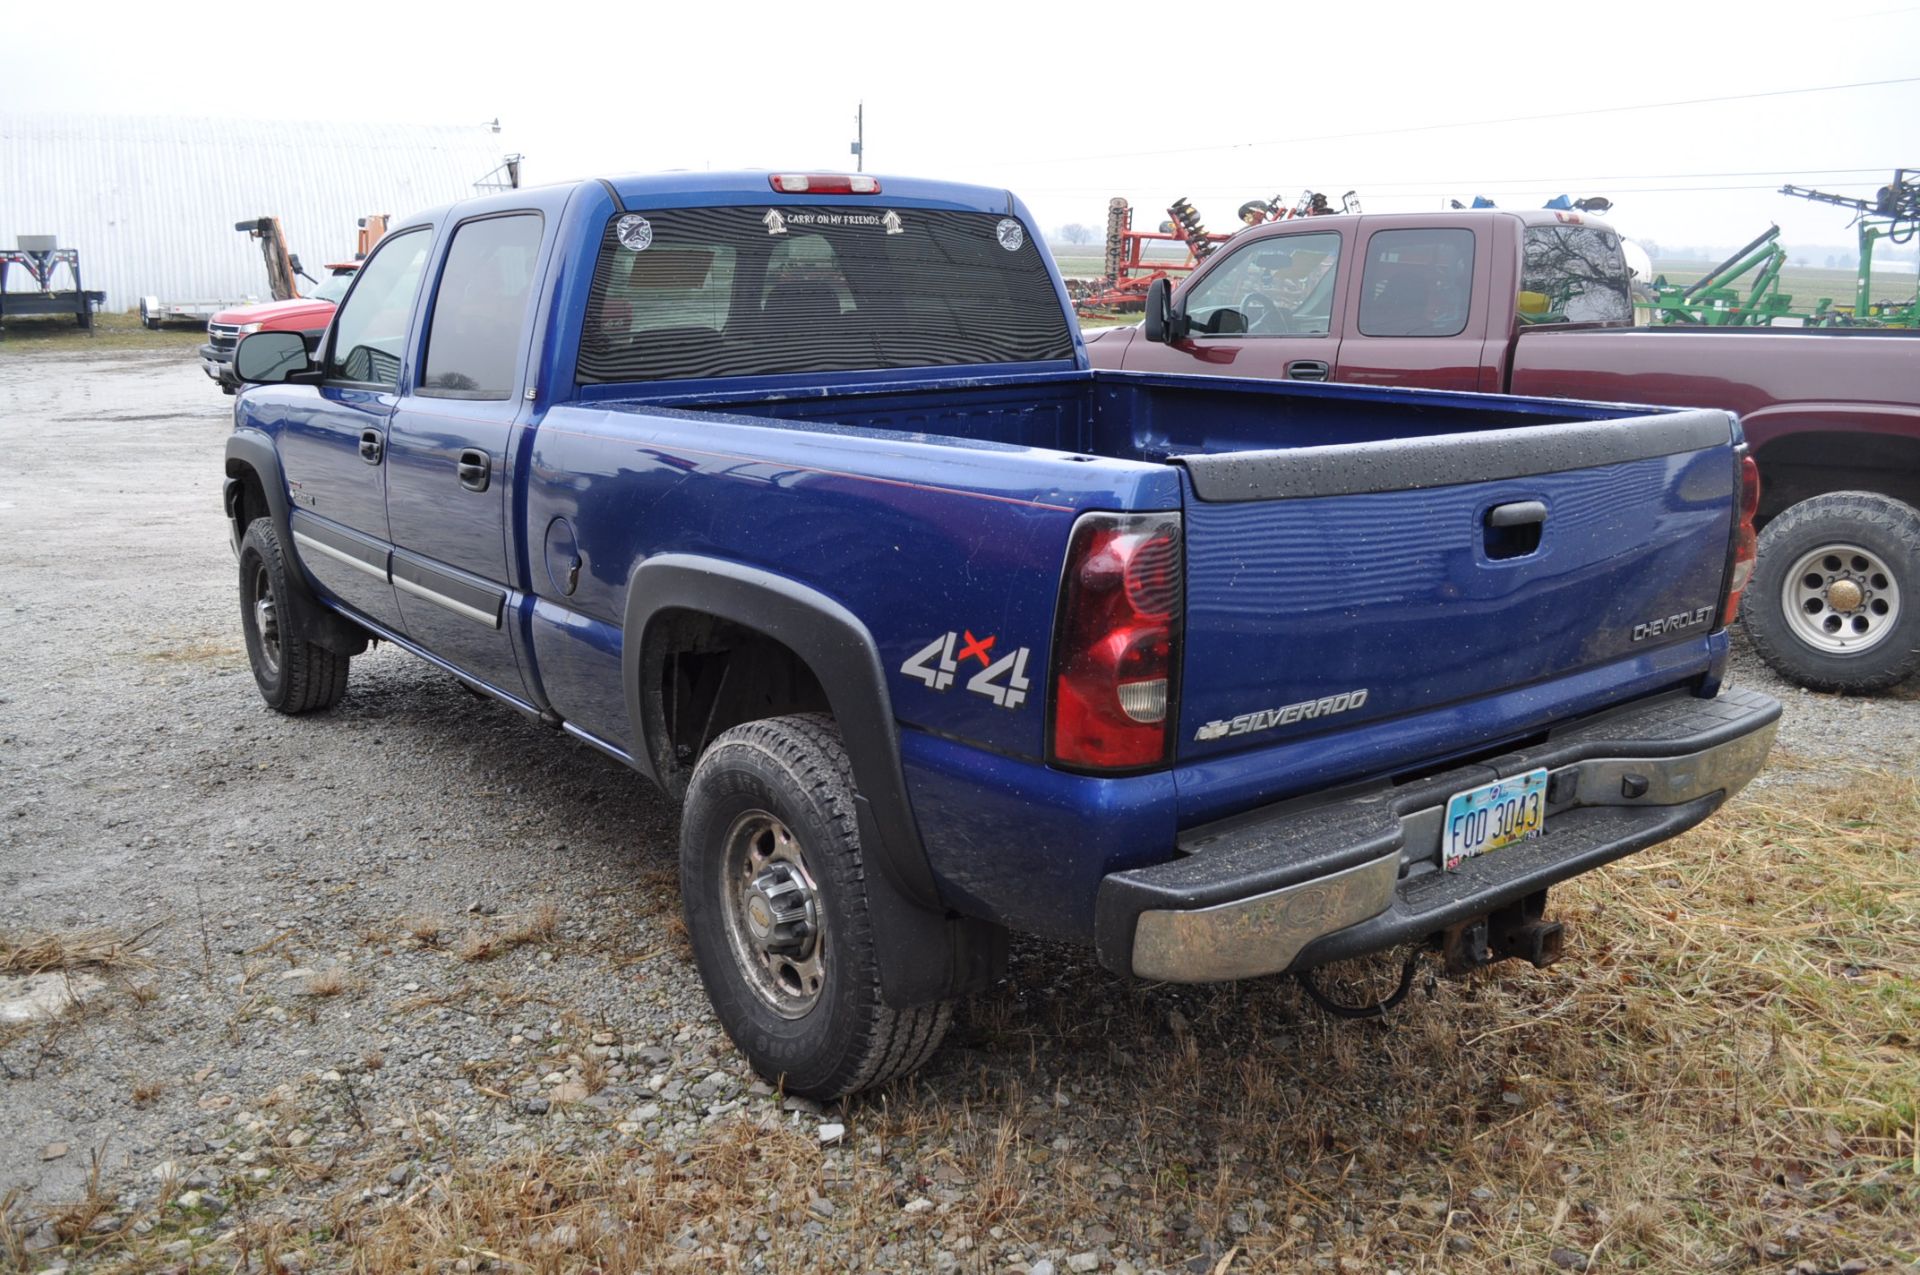 2004 Chevy Silverado 2500 HD LS Pickup Truck, Crew Cab, 6.5’ bed, 4x4, Allison automatic - Image 2 of 24